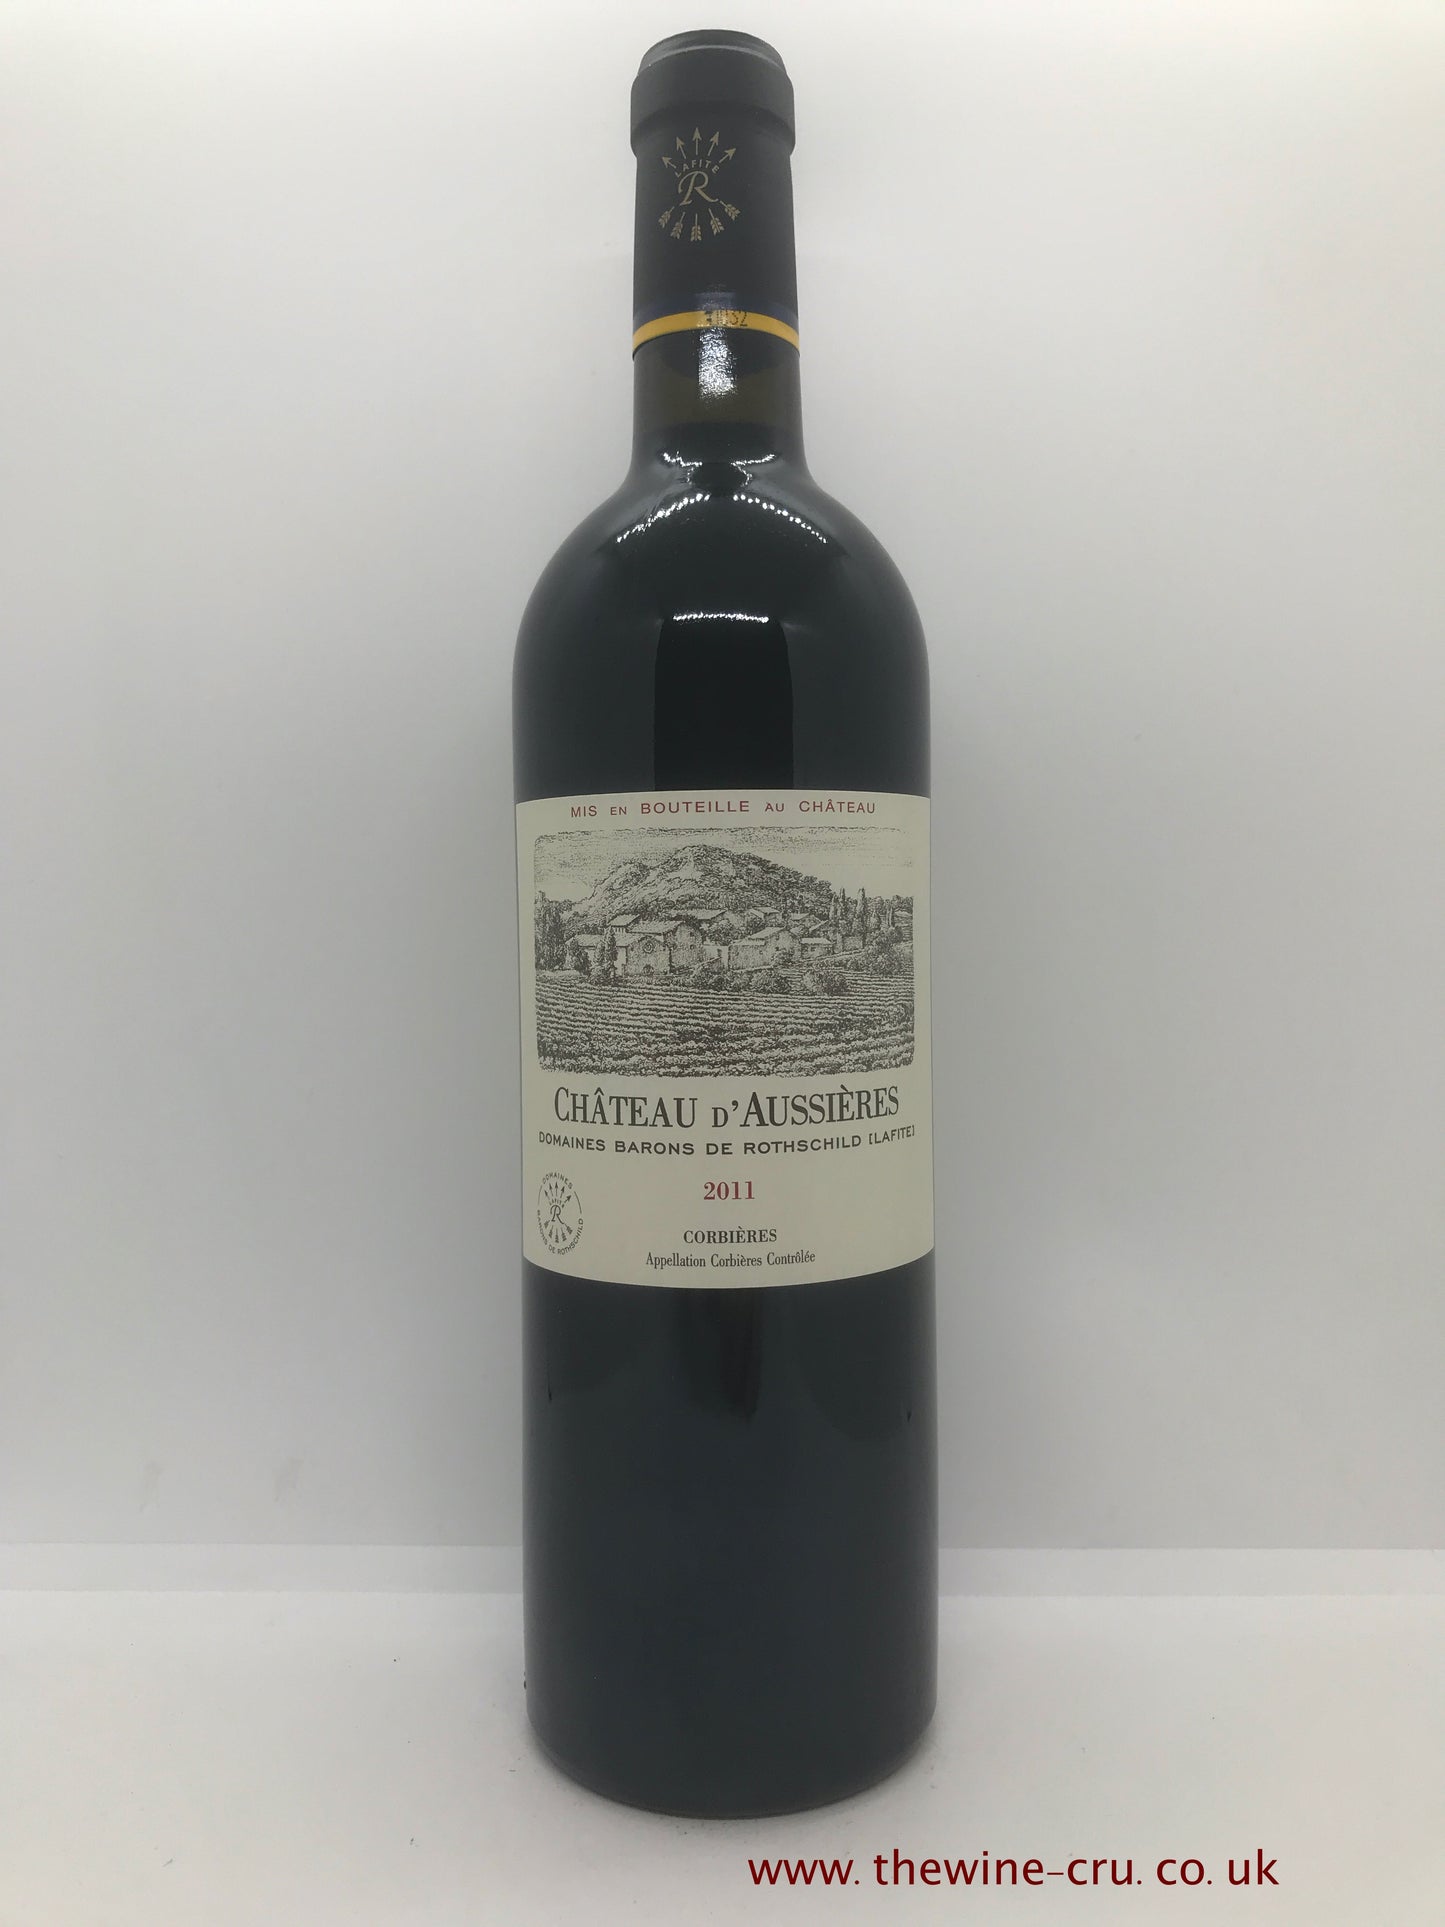 2011 vintage red wine. Chateau D'Aussieres 2011. France, Languedoc. Immediate delivery. Free local delivery. Gift wrapping available.